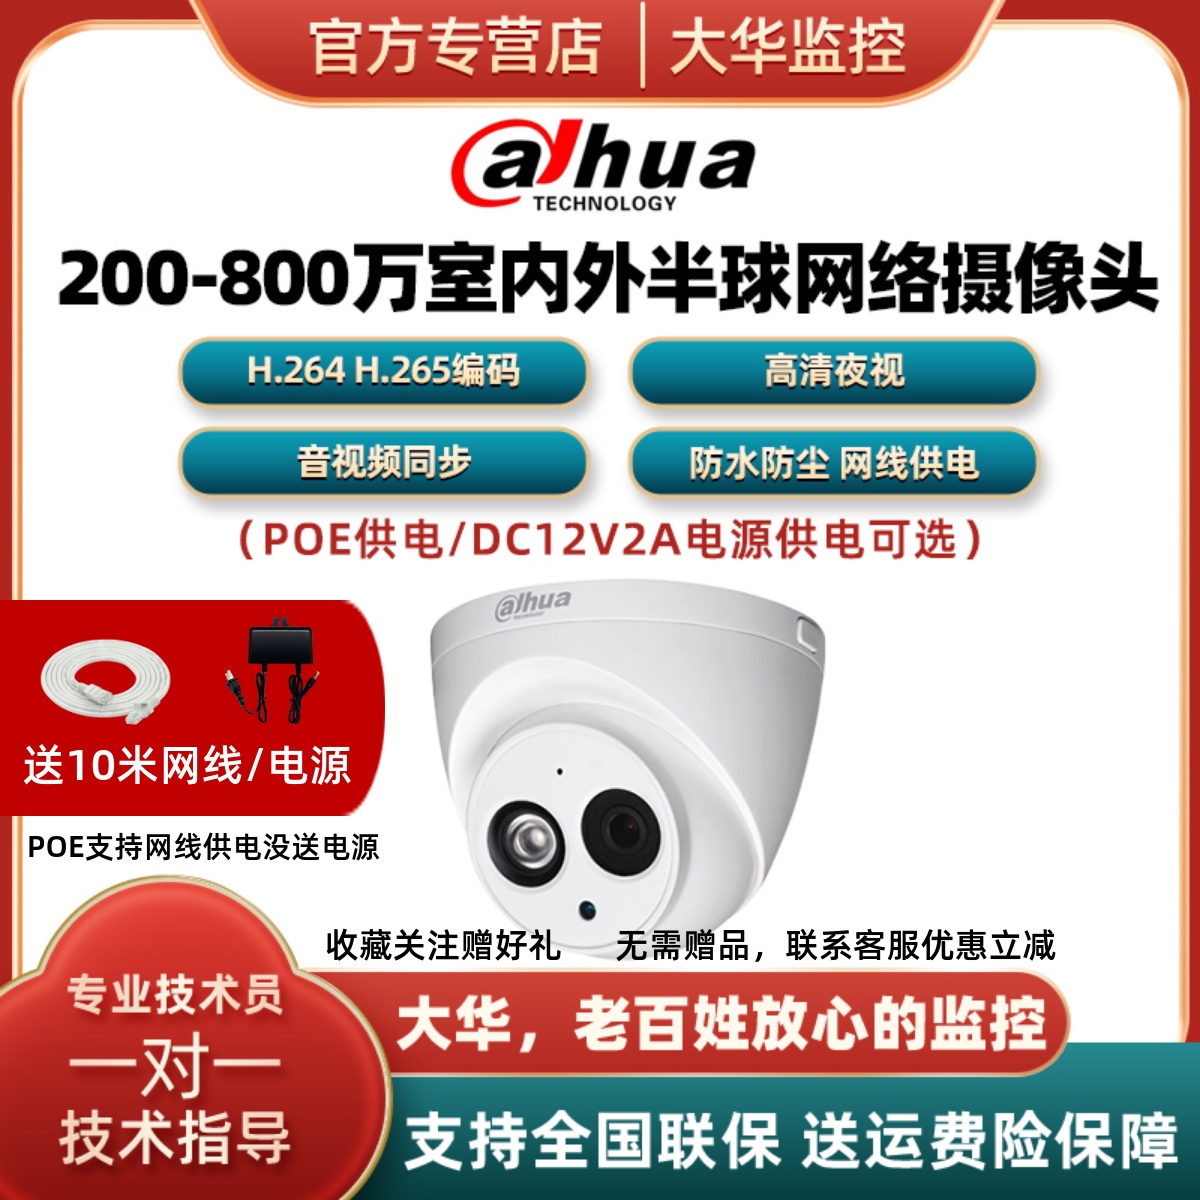 Dahua 2/4/8 million hemispherical surveillance head high-definition full color H.265 indoor and outdoor home network camera